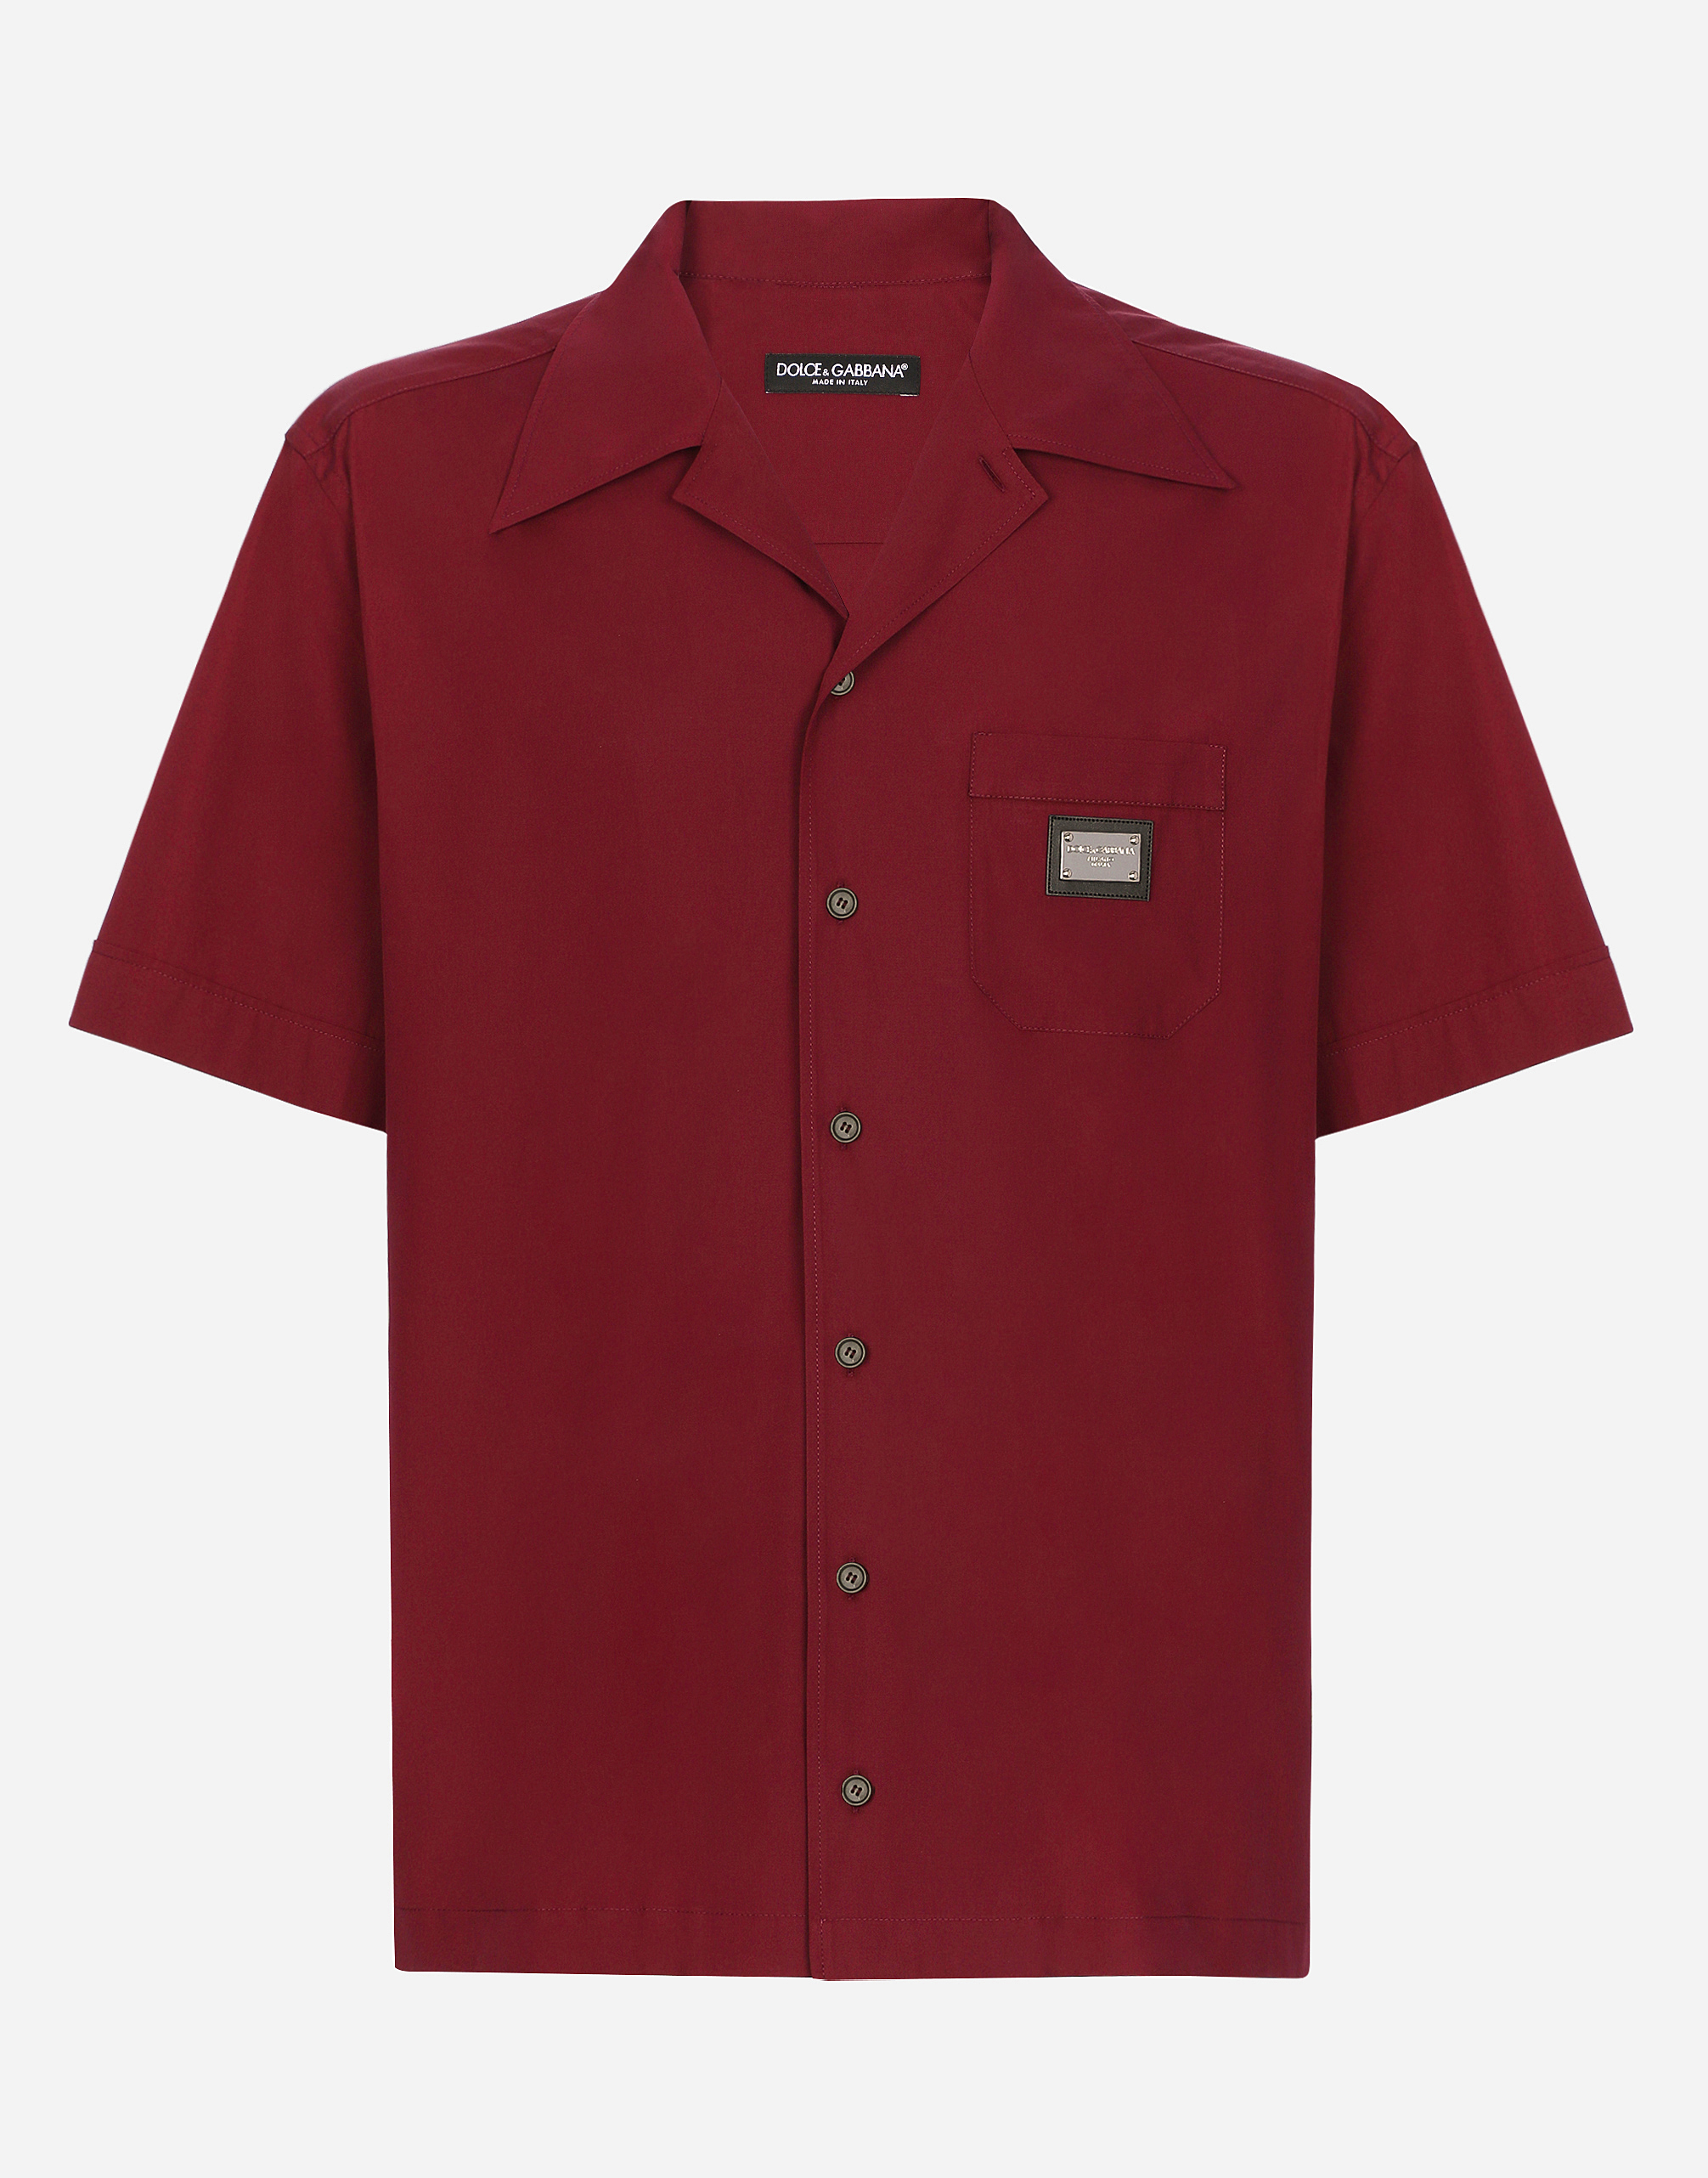 Cotton Hawaiian shirt with branded tag in Bordeaux